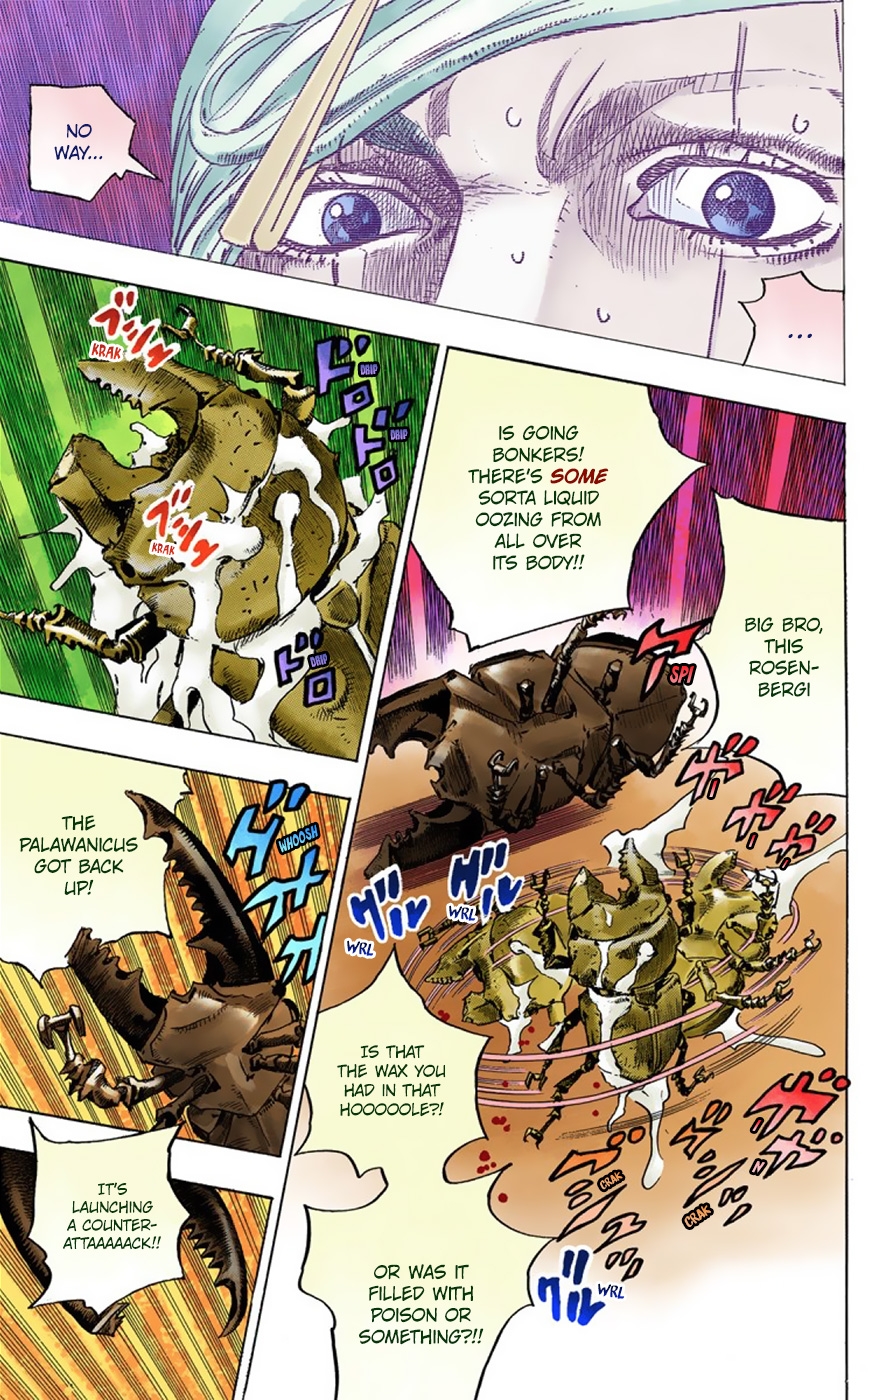 JoJo's Bizarre Adventure Part 8 JoJolion (Official Colored) Vol. 9 Ch. 37 Every Day is a Summer Vacation Part 4